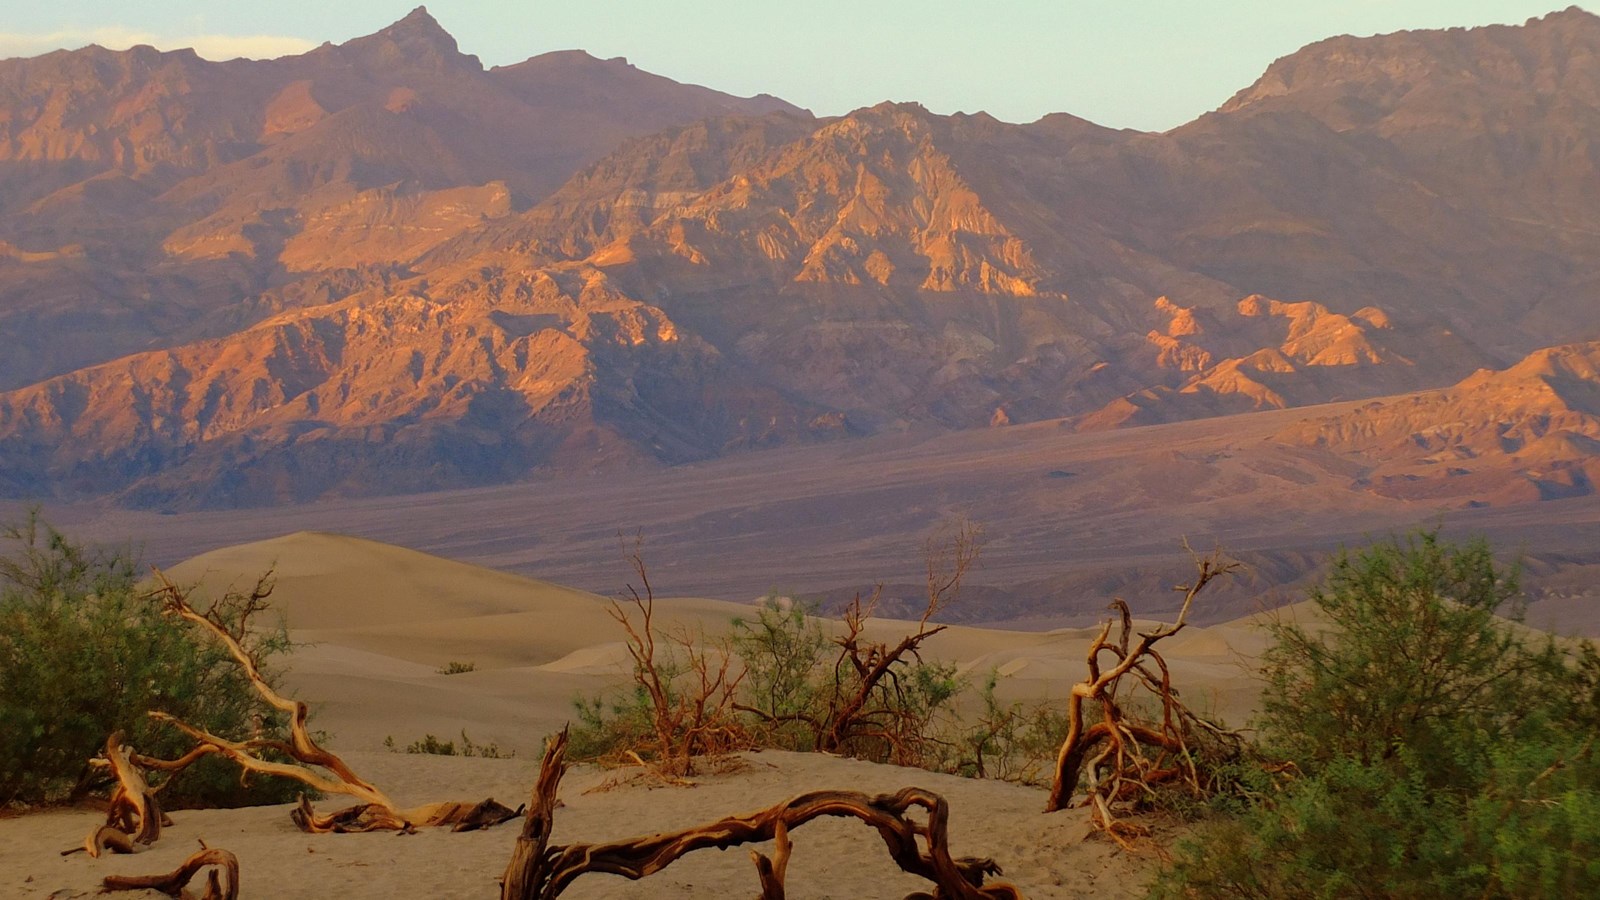 Green mesquite trees grow on white sand dunes, and evening light shines on distant mountains.